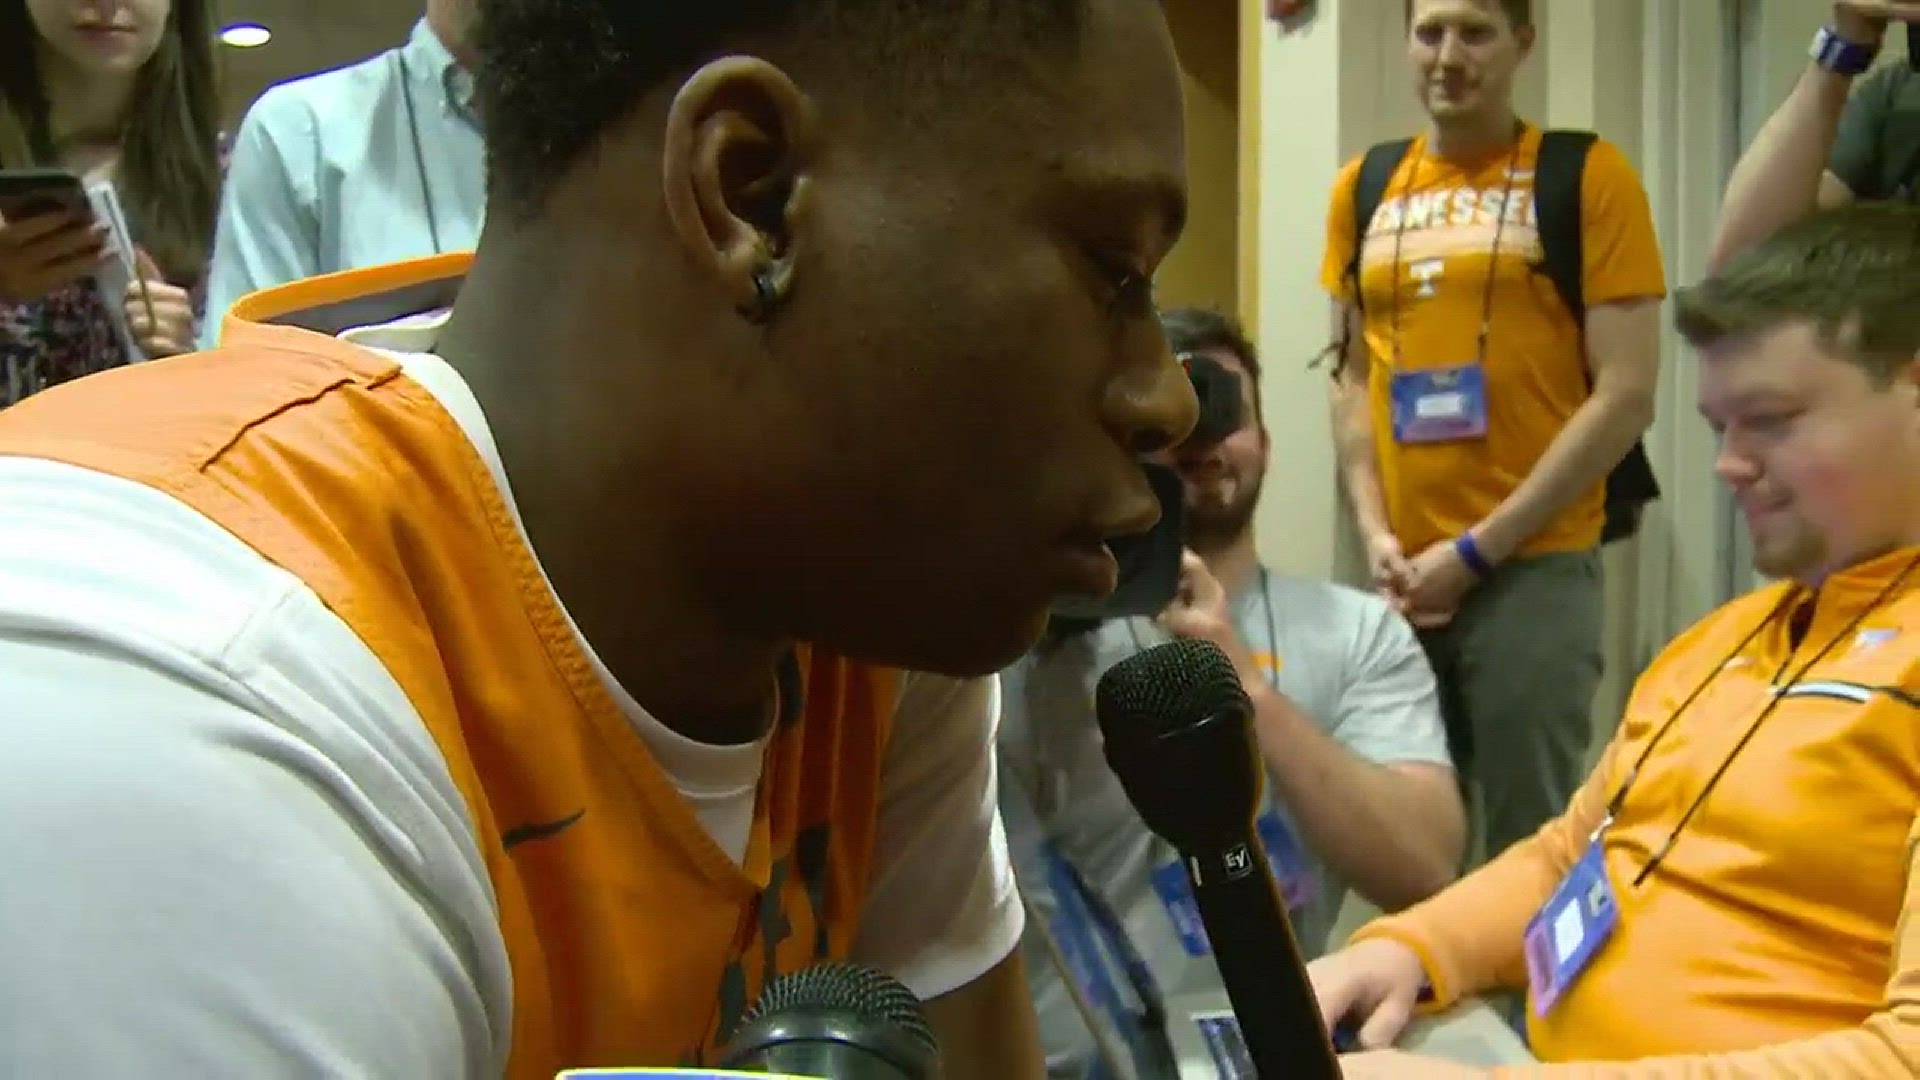 Admiral Schofield had a little fun in the locker room before practice on Friday, asking his teammates the tough questions.